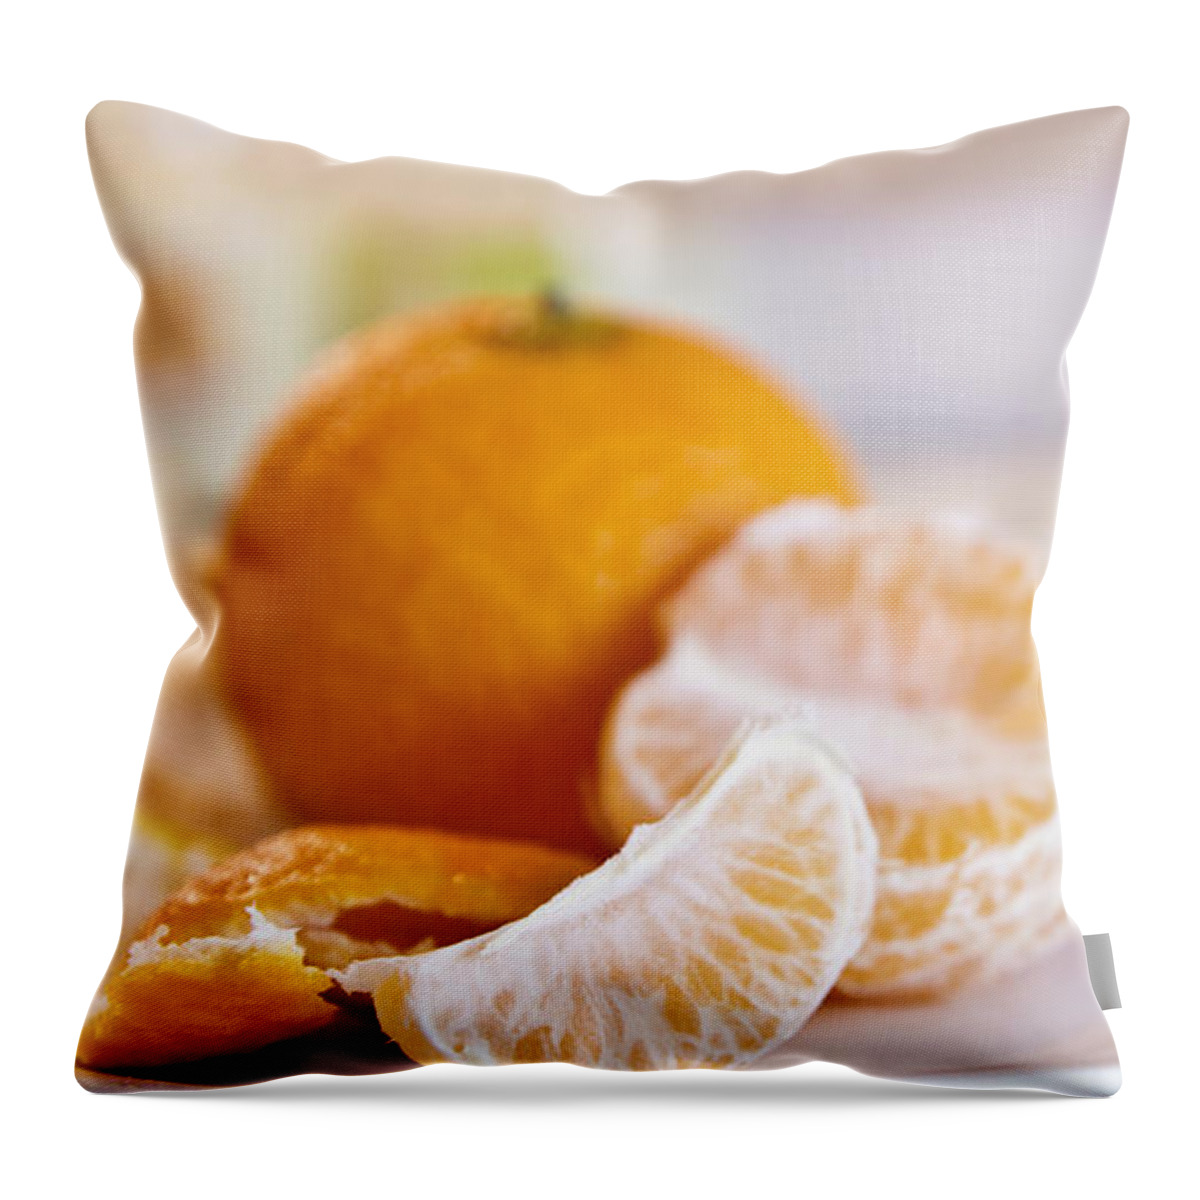 Orange Throw Pillow featuring the photograph Freshly peeled citrus by Cindy Garber Iverson